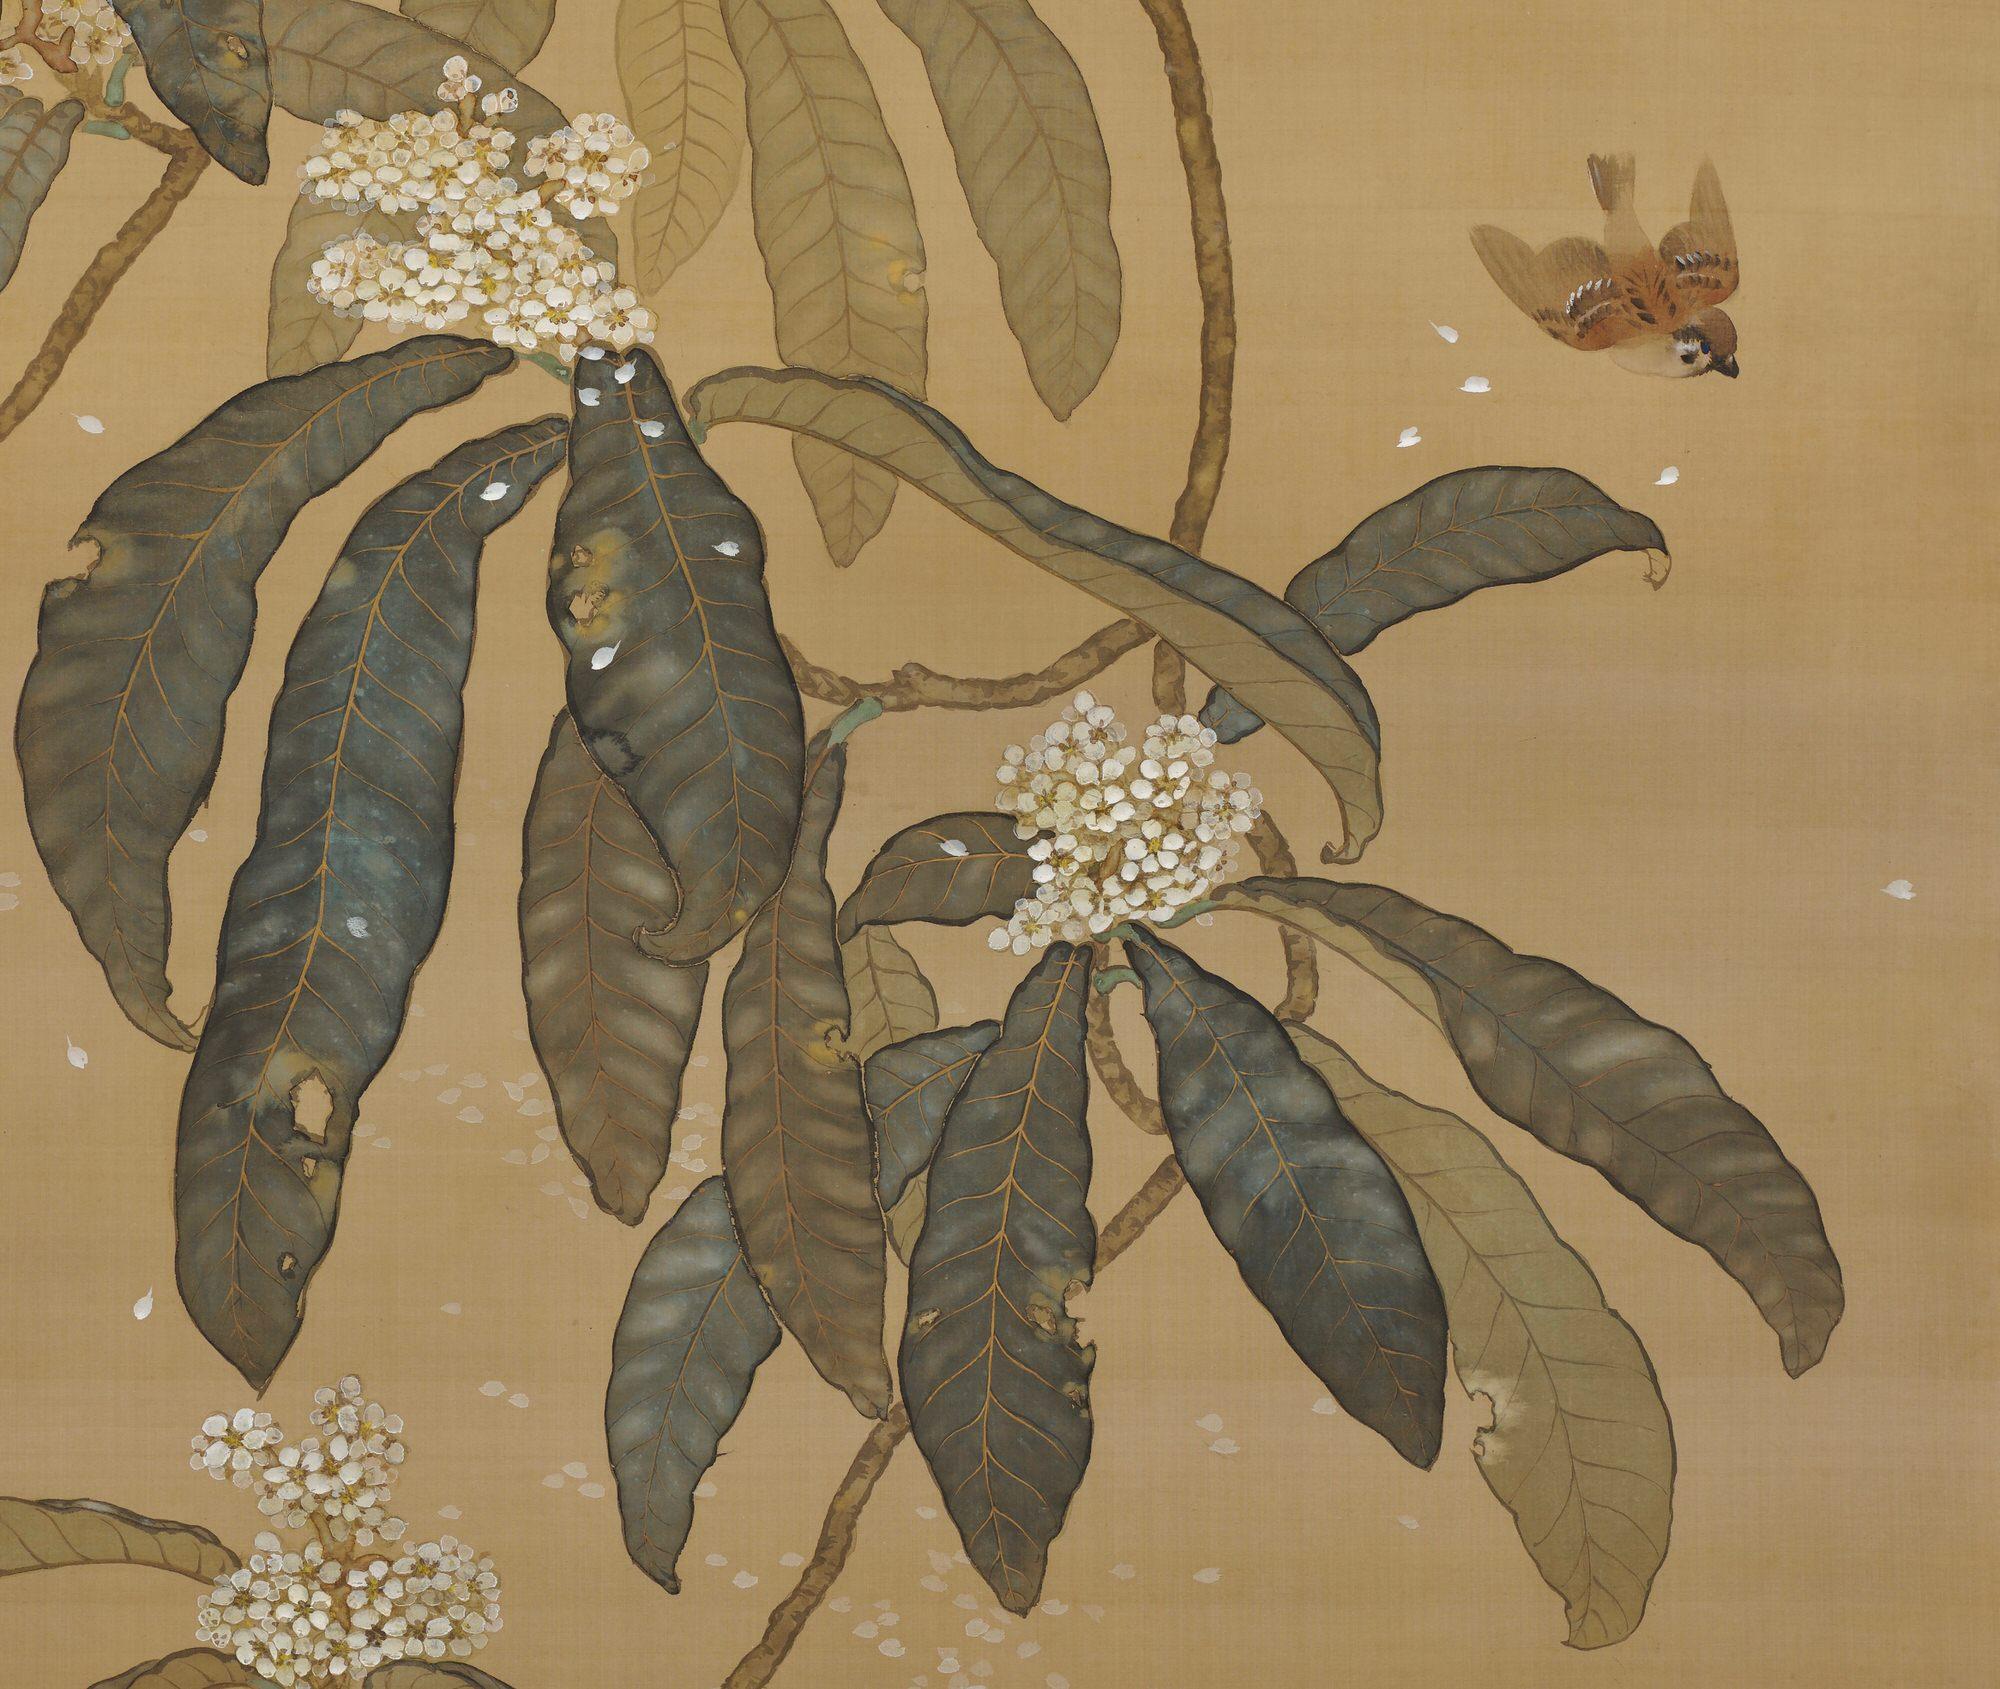 Saegusa Soko (1886-1947)
Loquat and Sparrows
Early Taisho period, circa 1910-1915
Hanging scroll painting. Mineral pigments, ink and gofun on silk
Signed: Soko 
Sealed: Soko
Dimensions:
Scroll: H. 221 cm x W. 103 cm (87” x 40.5”)
Image: H. 182 cm x